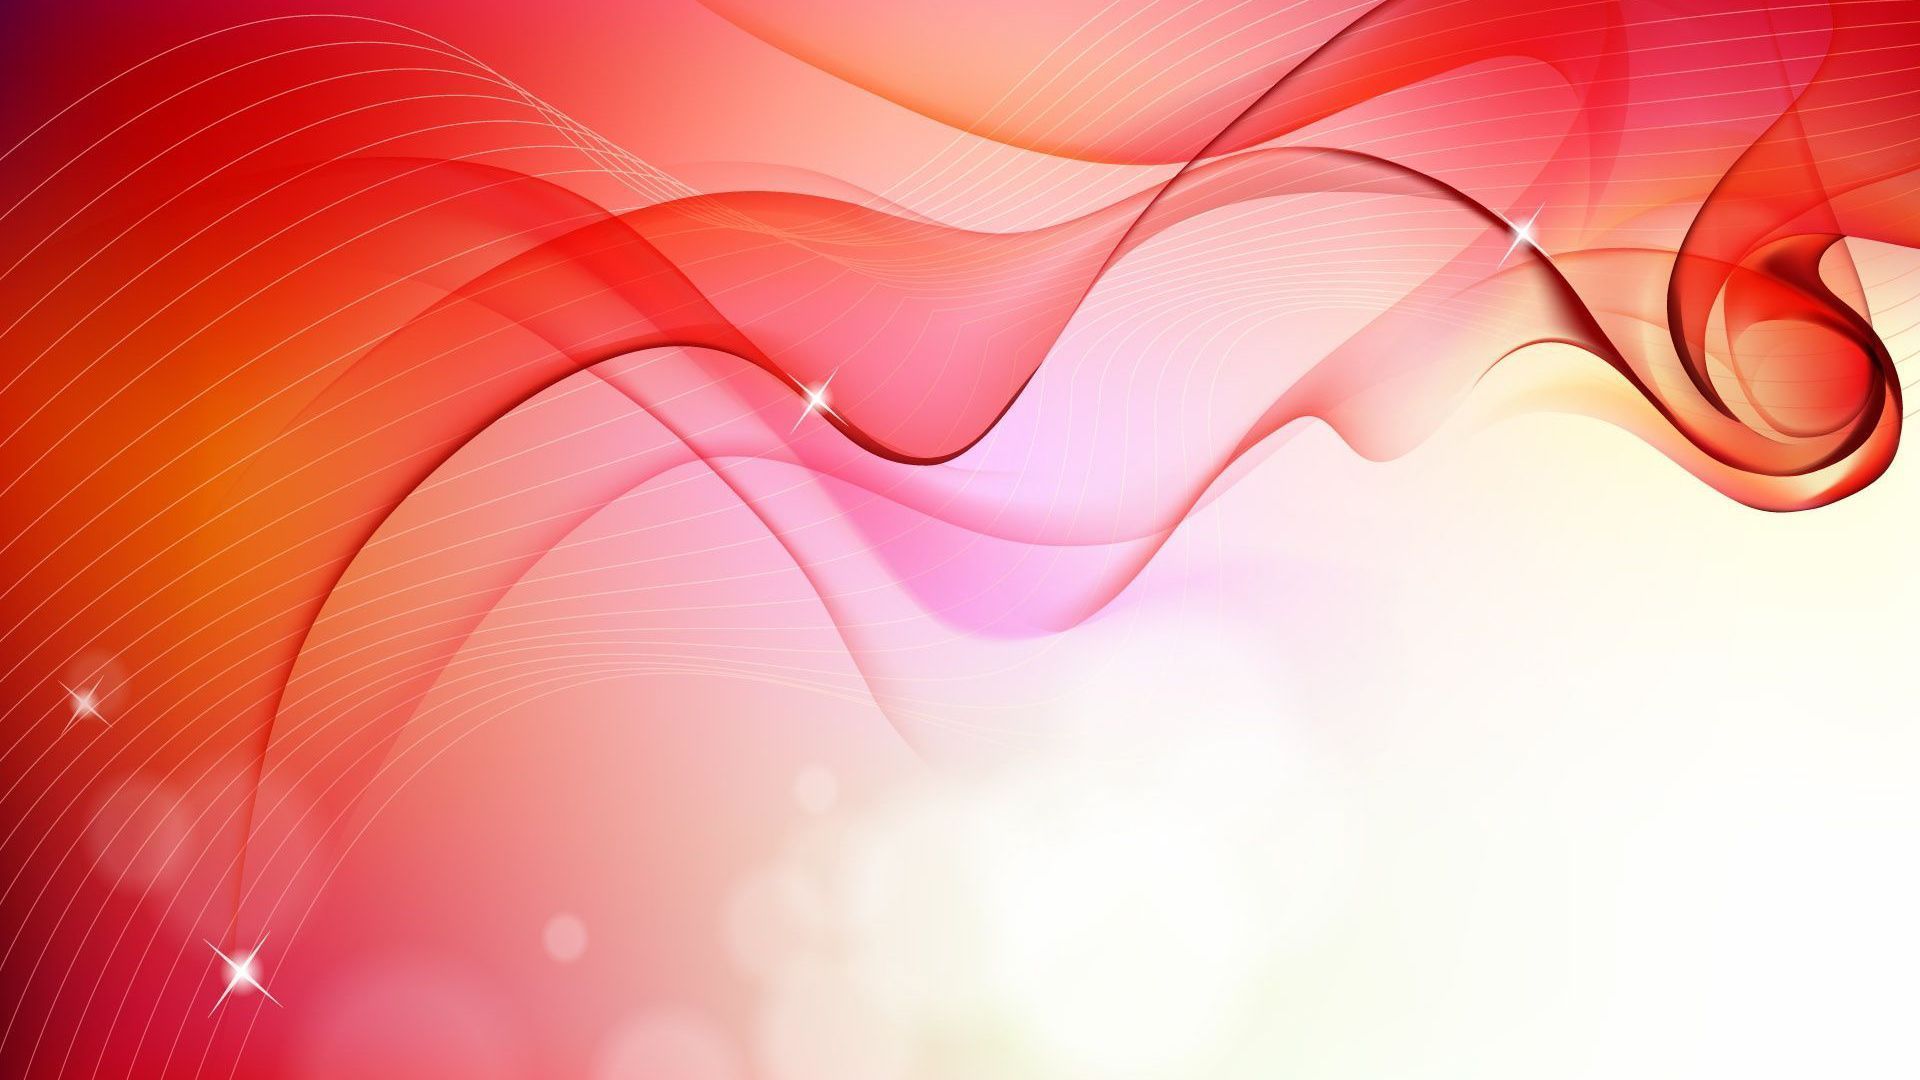 A red and orange abstract background - Bright